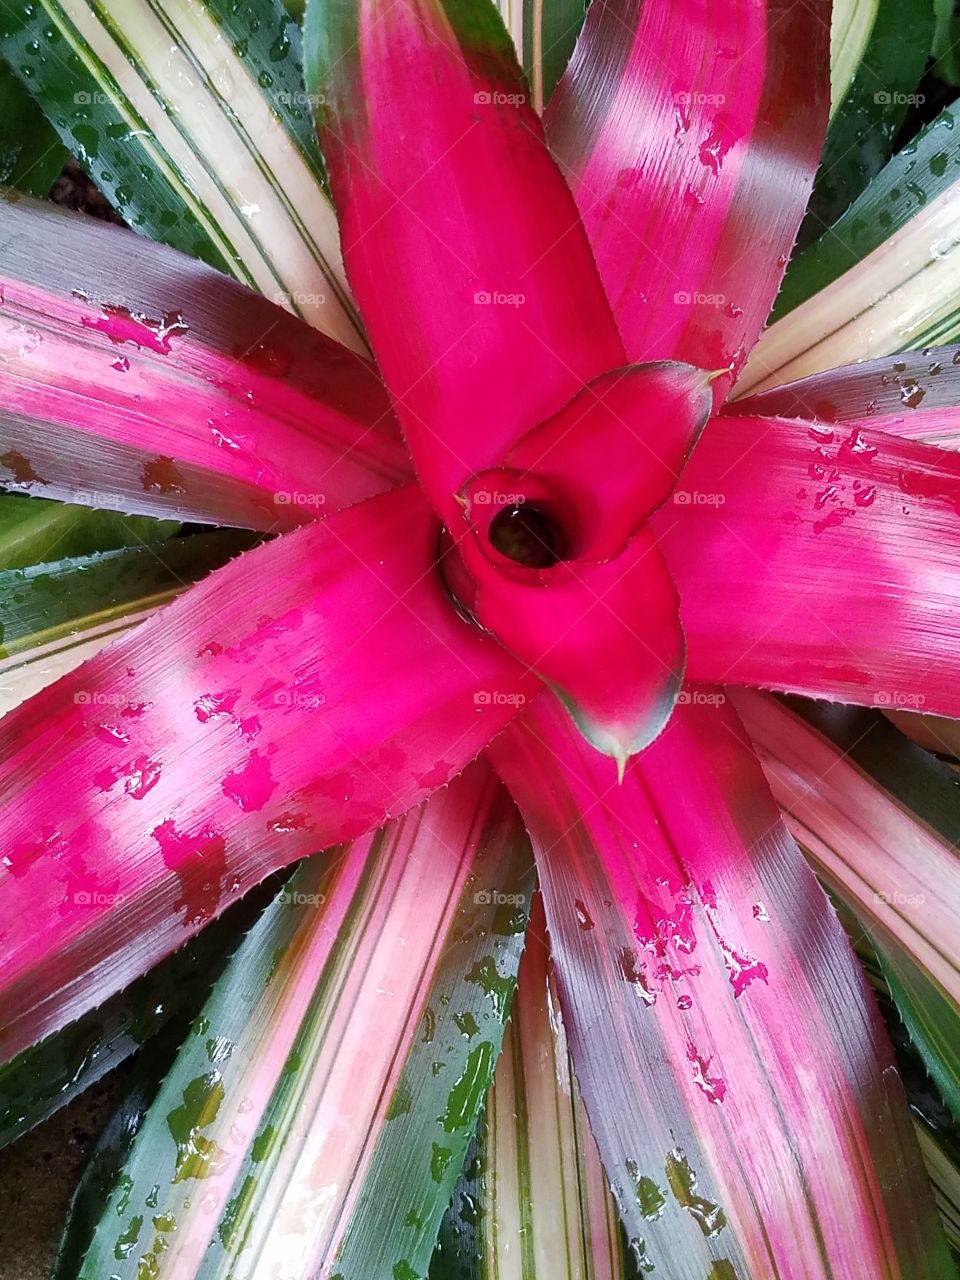 Hot pink plant